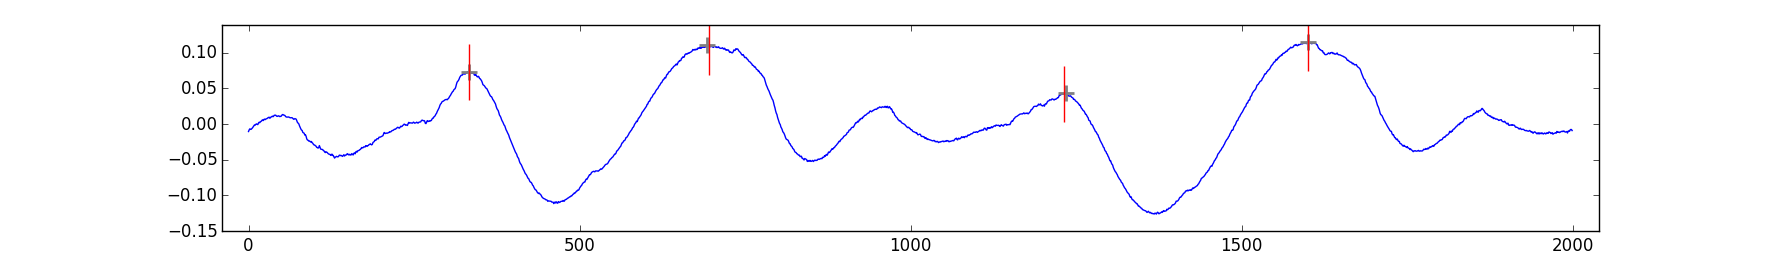 Plot of results from PeakUtils interpolate